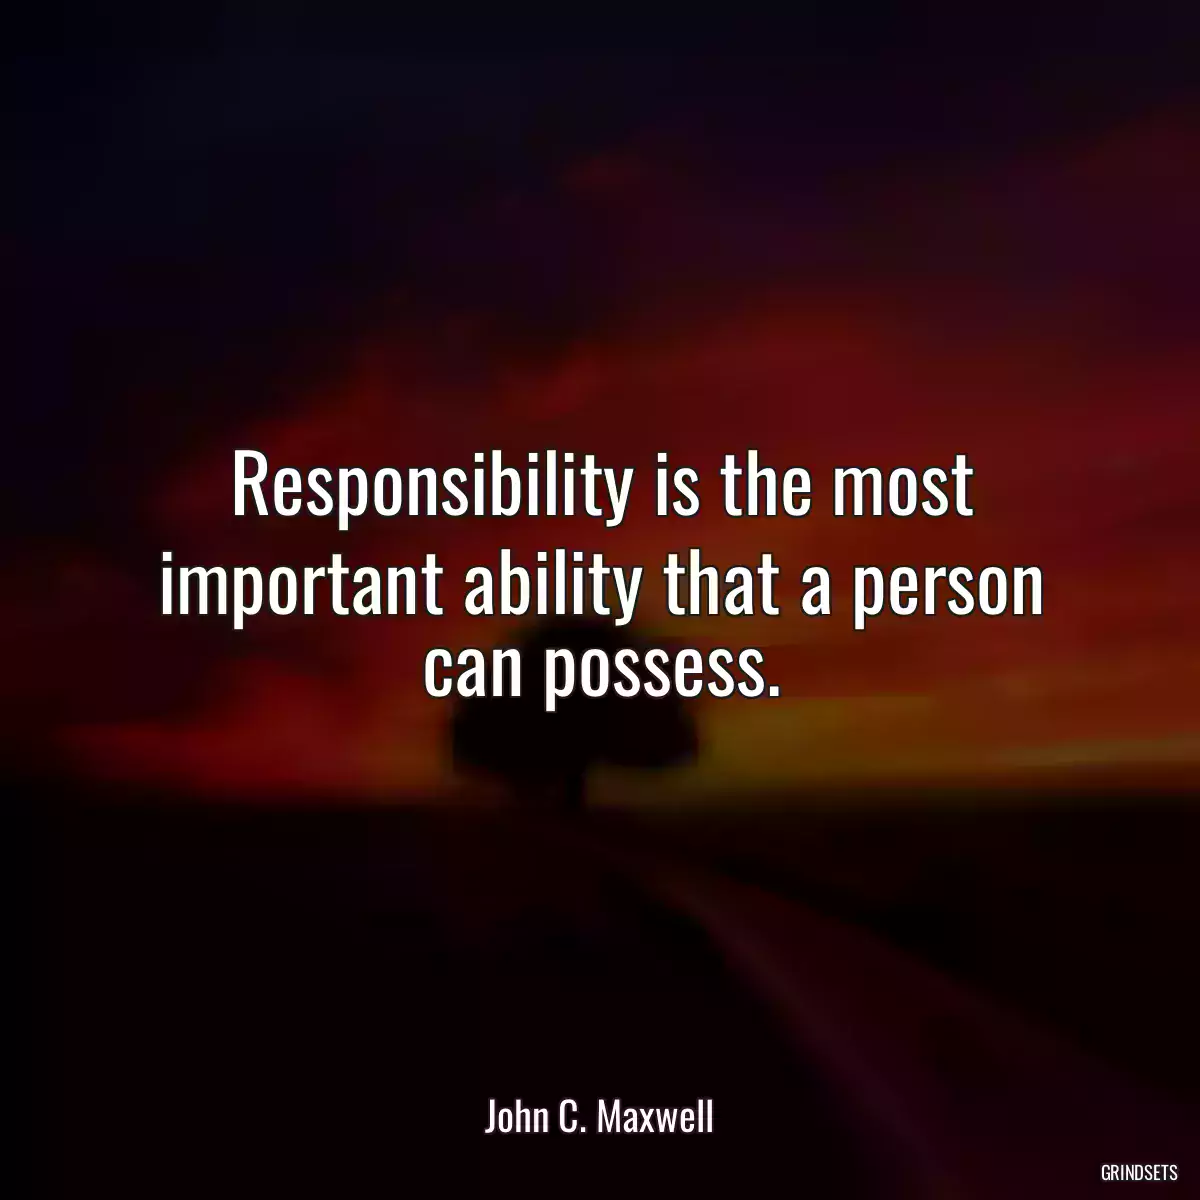 Responsibility is the most important ability that a person can possess.